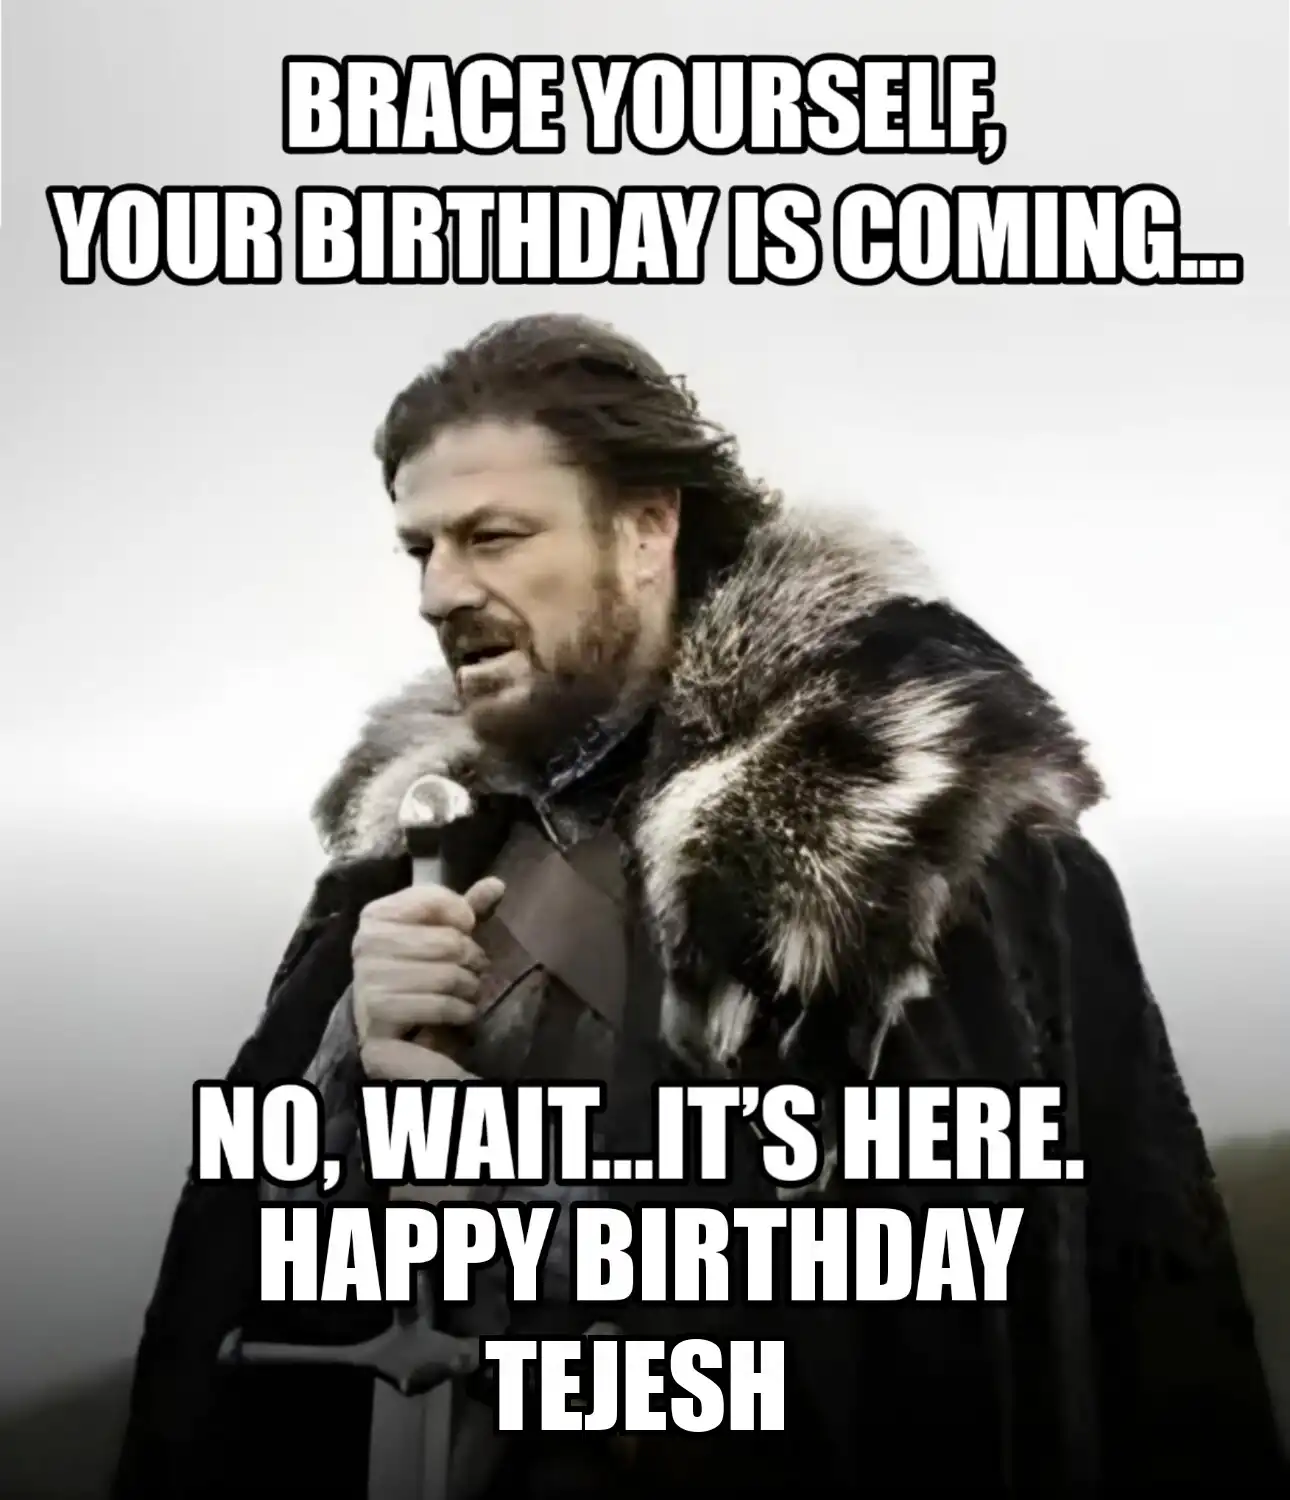 Happy Birthday Tejesh Brace Yourself Your Birthday Is Coming Meme